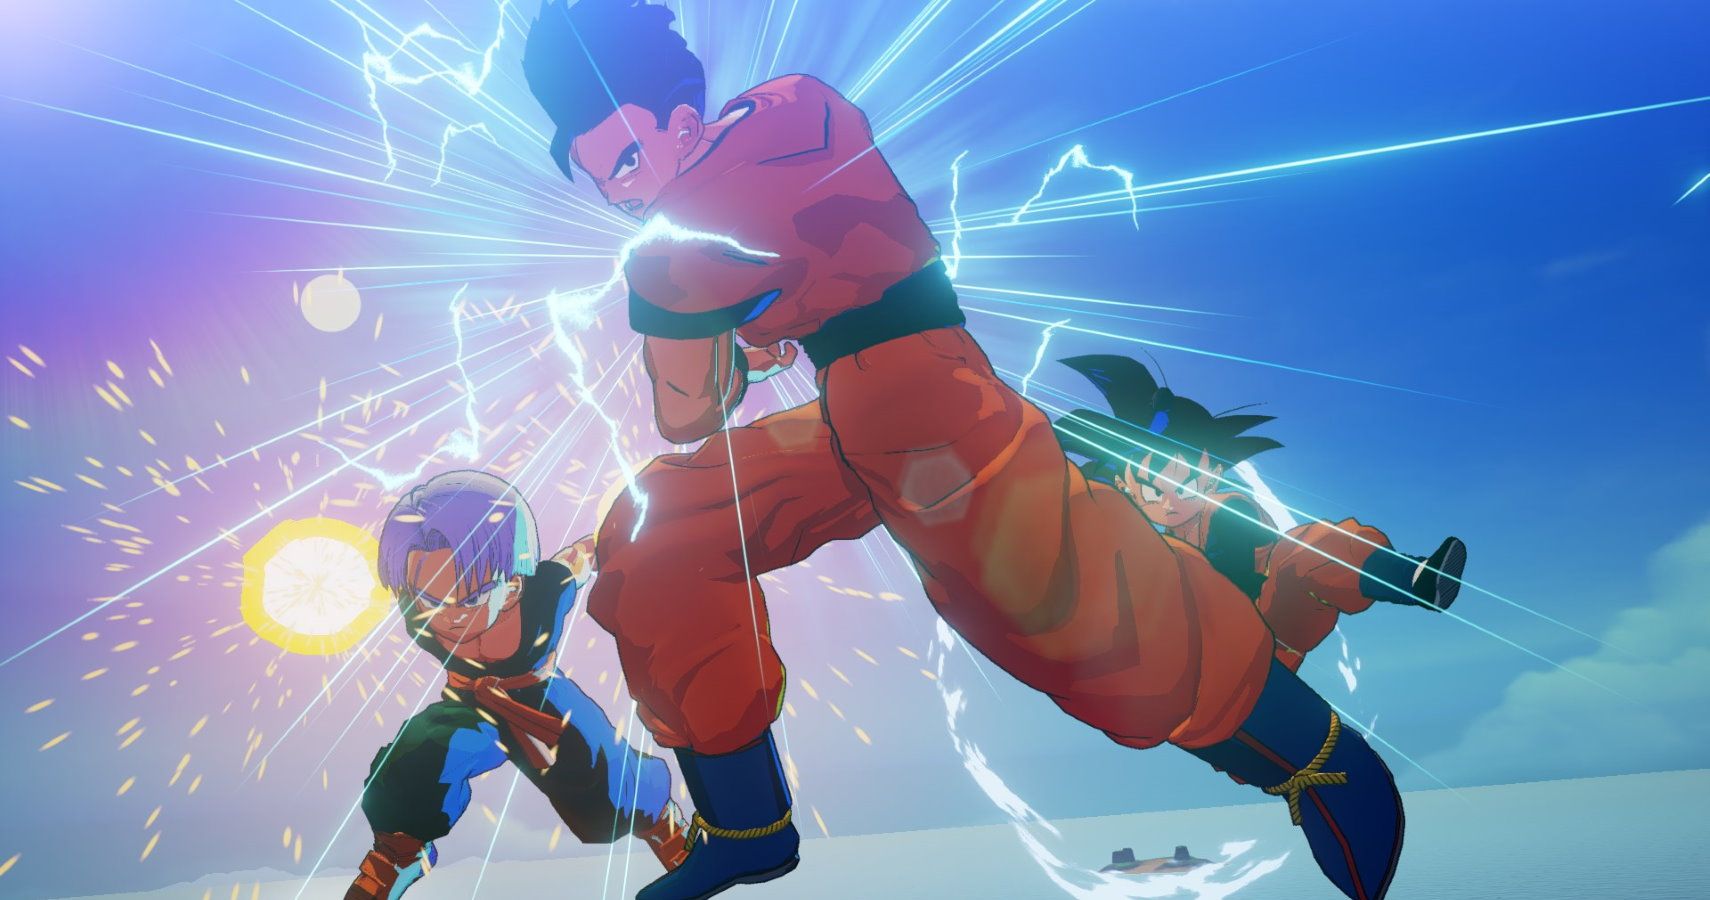 Dragon Ball Z Kakarot Screenshots Show Off Goten Trunks And Android 18 In Action